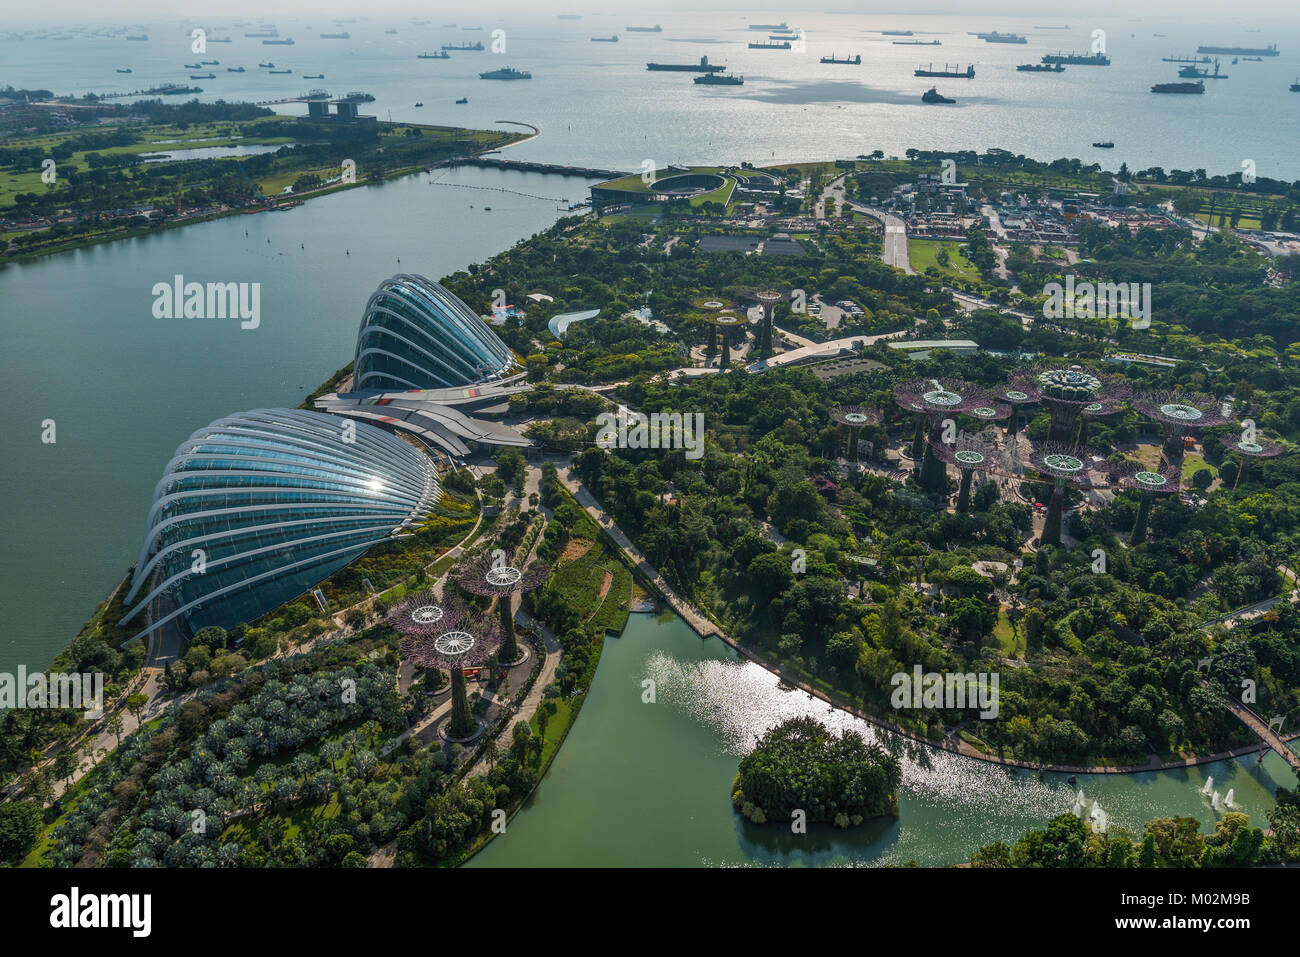 Gardens by the bay, Marina Bay, Singapour Banque D'Images